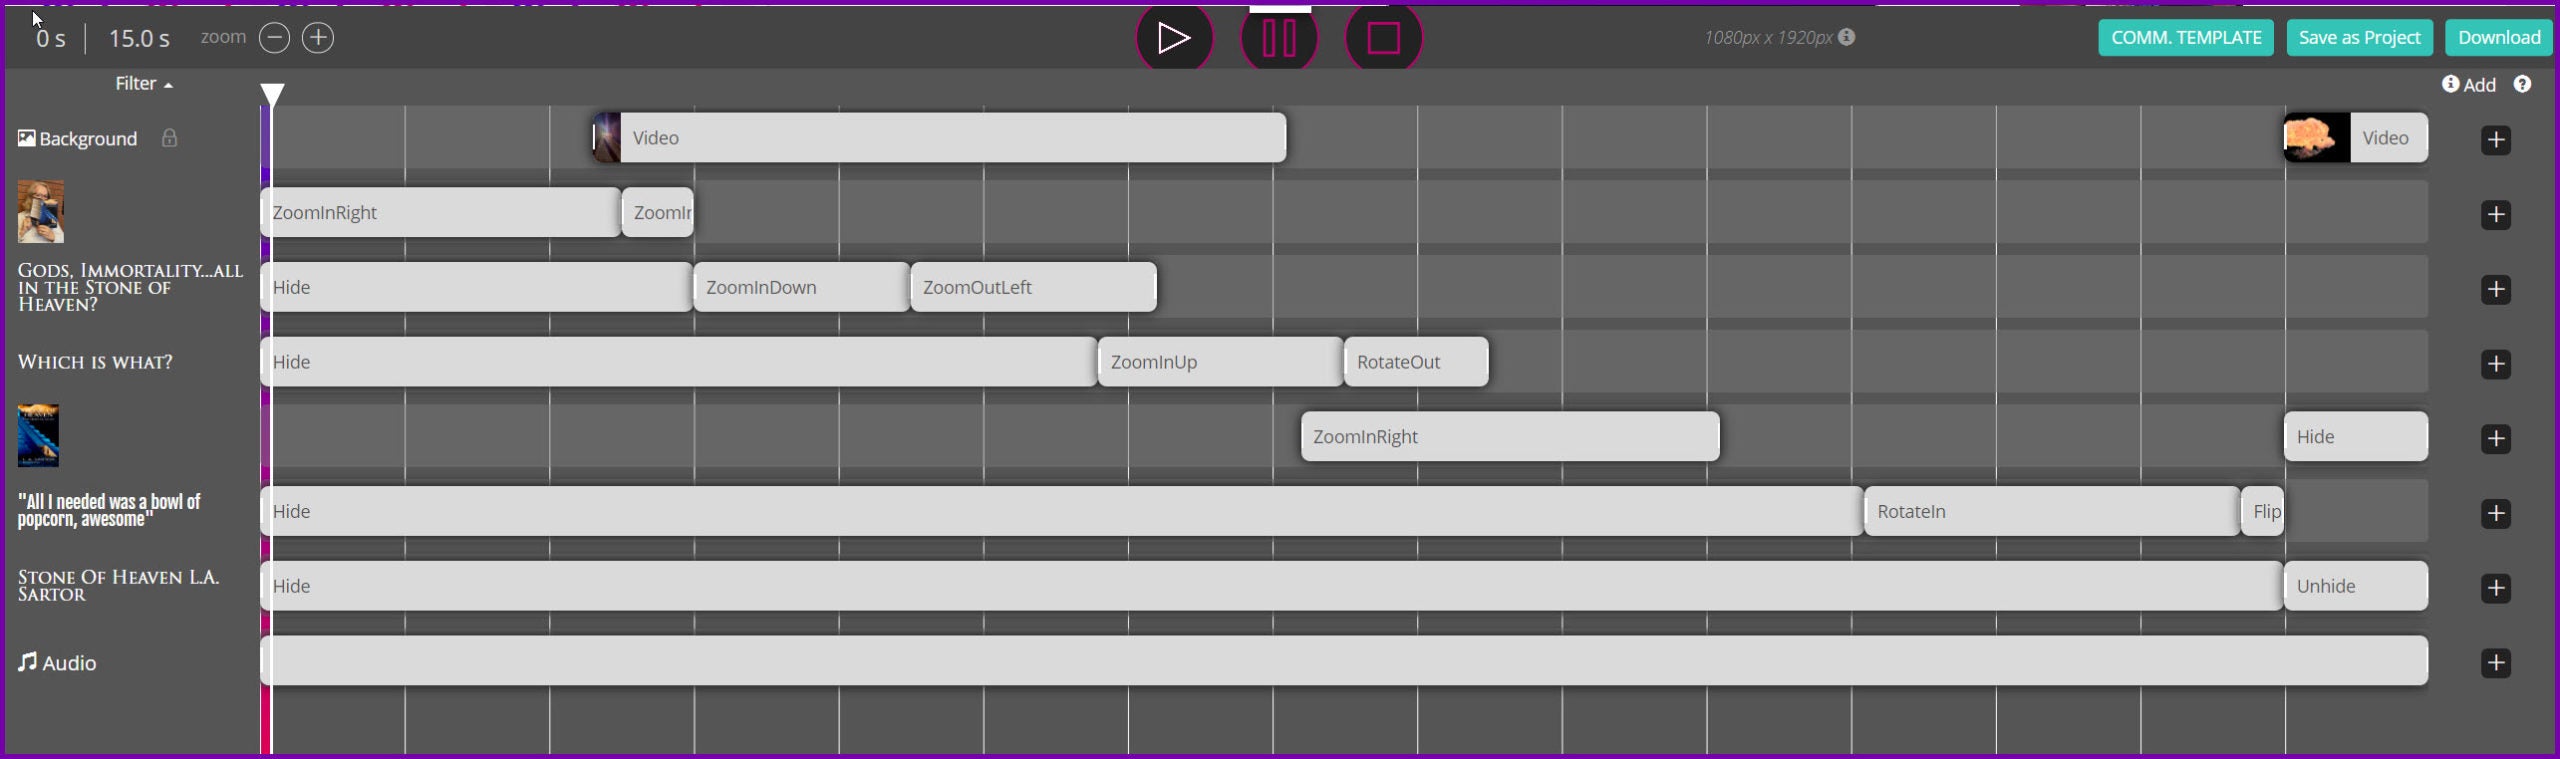 Screen shot of what the Trailer Creator timeline looks like for L.A. Sartor's TikTok style trailer